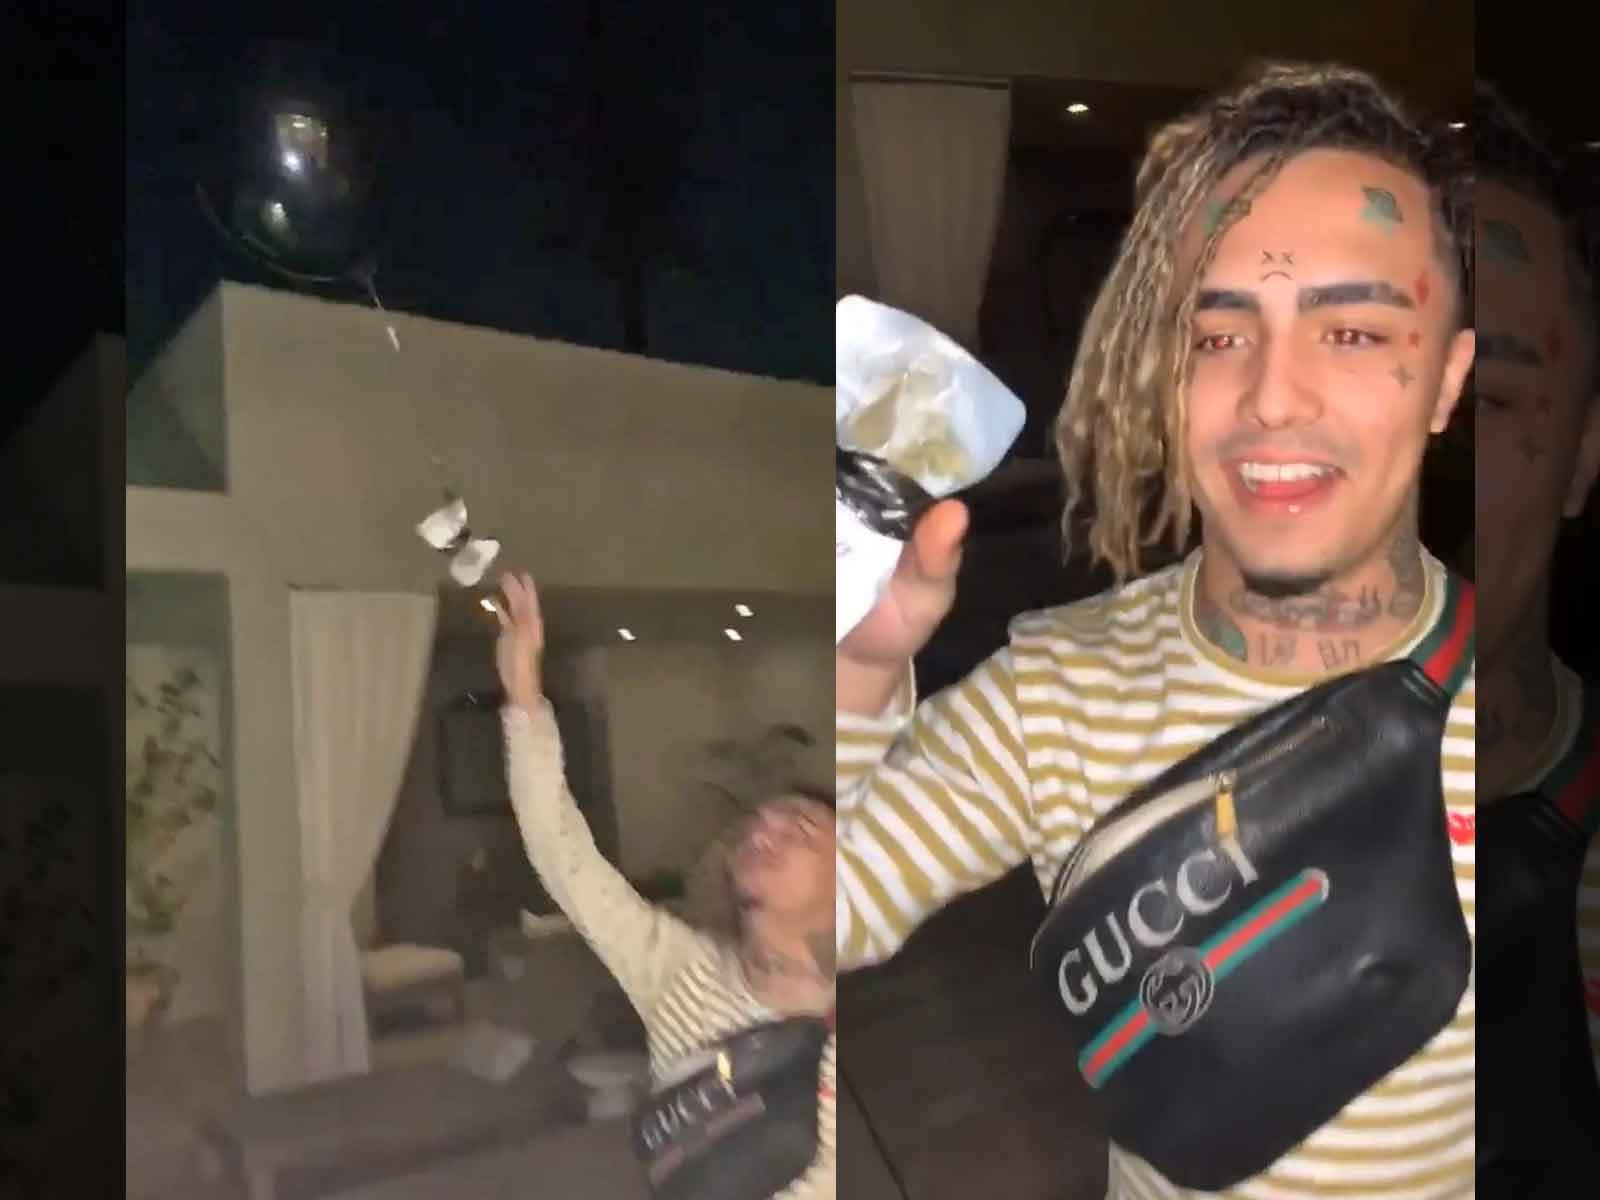 Lil Pump Goes Super High By Fixing Marijuana to Balloon: ‘So God Can Smoke’